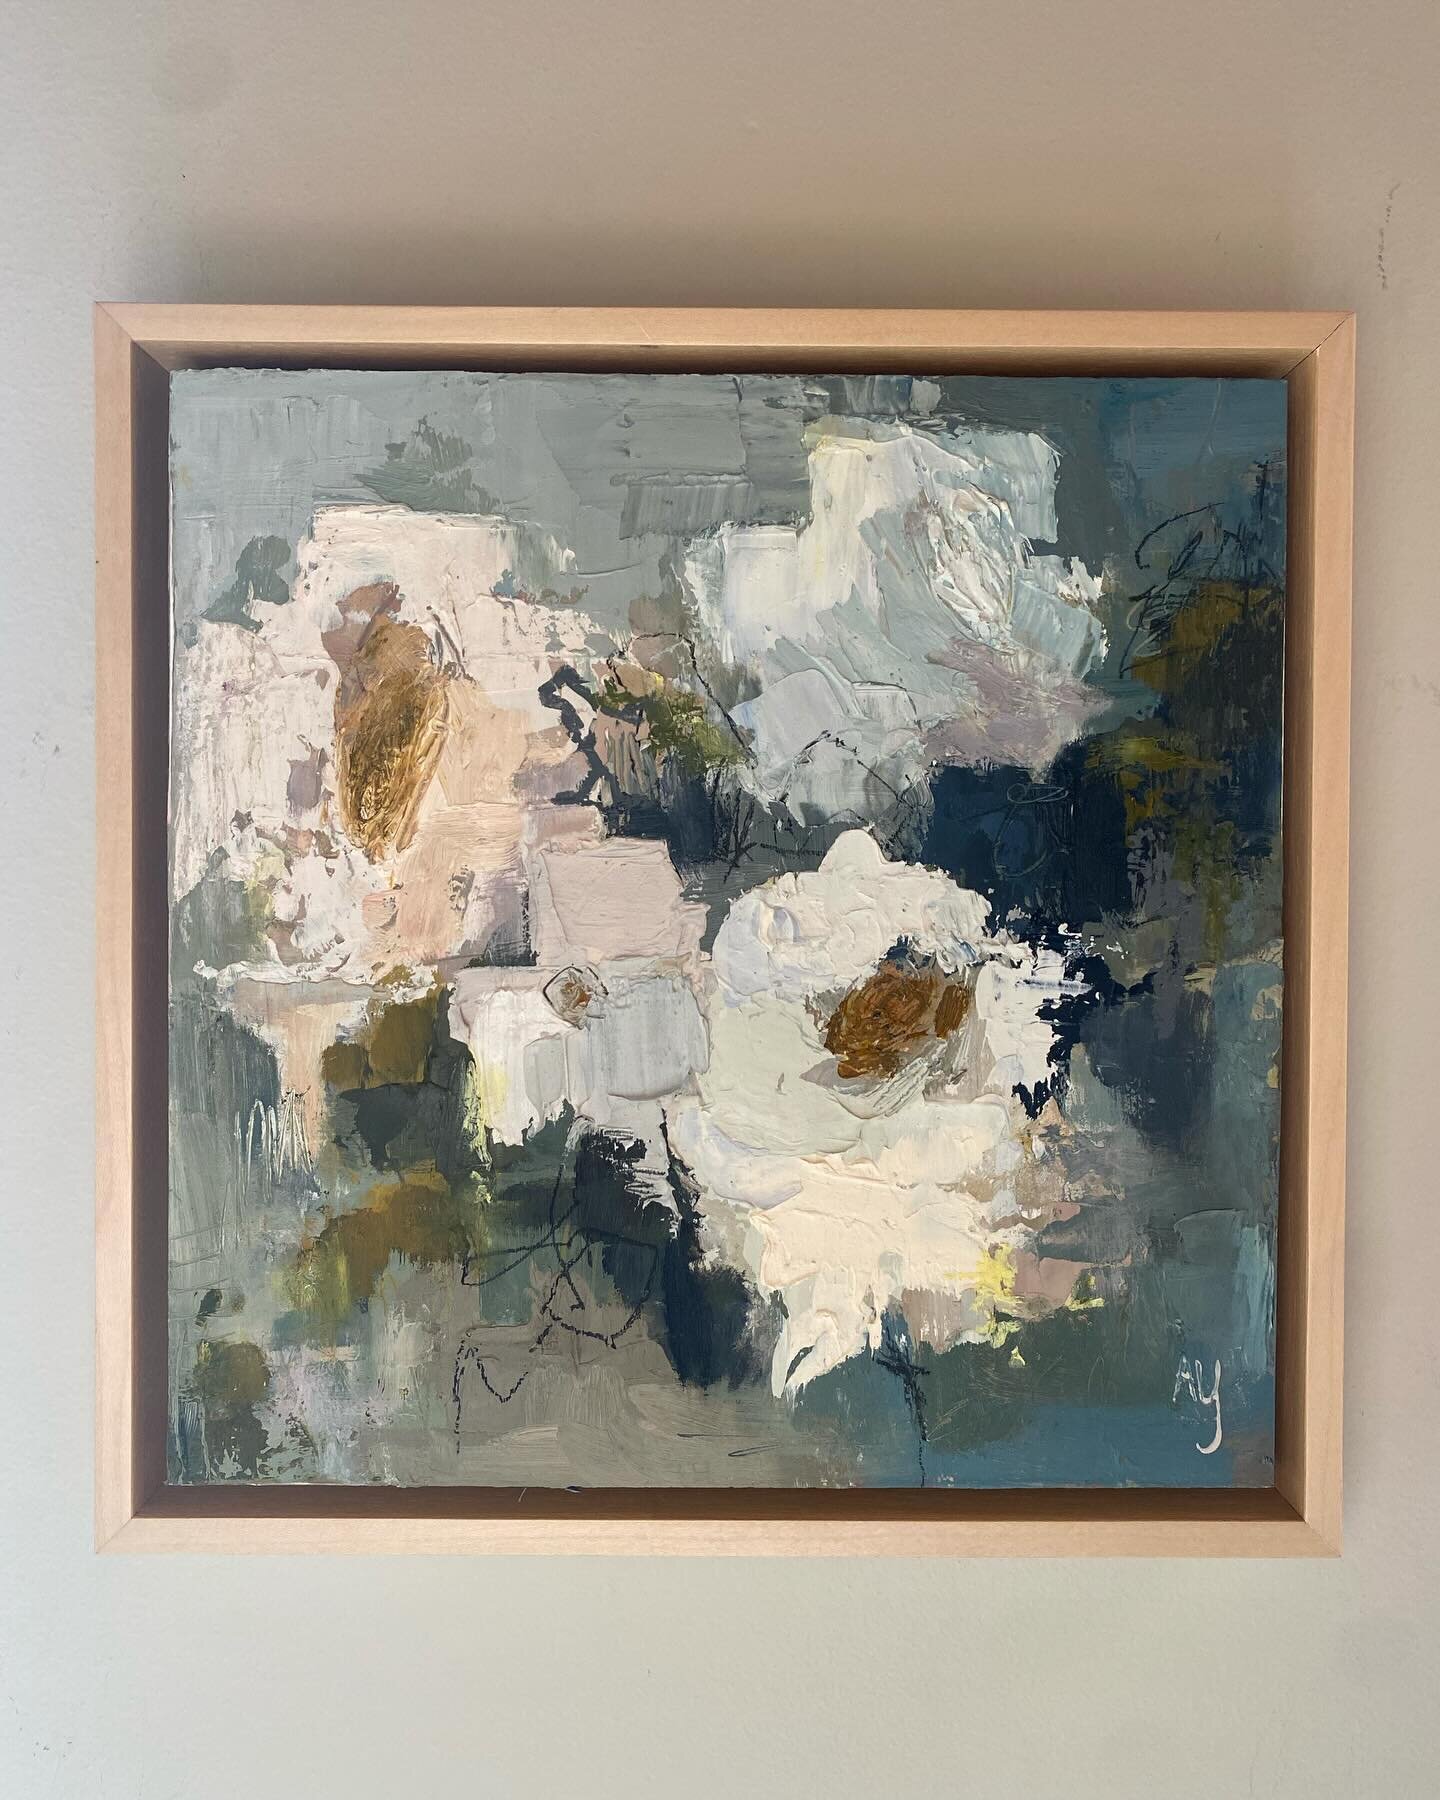 Perfect last minute gift! &ldquo;Shades of White&rdquo; 10 x 10 Oil on Panel framed in a natural maple floater. DM me for more info or check out my website! Perfect for the texture lover in your life. 
.
.
.
#oilpainting #abstractfloral #njartist #na